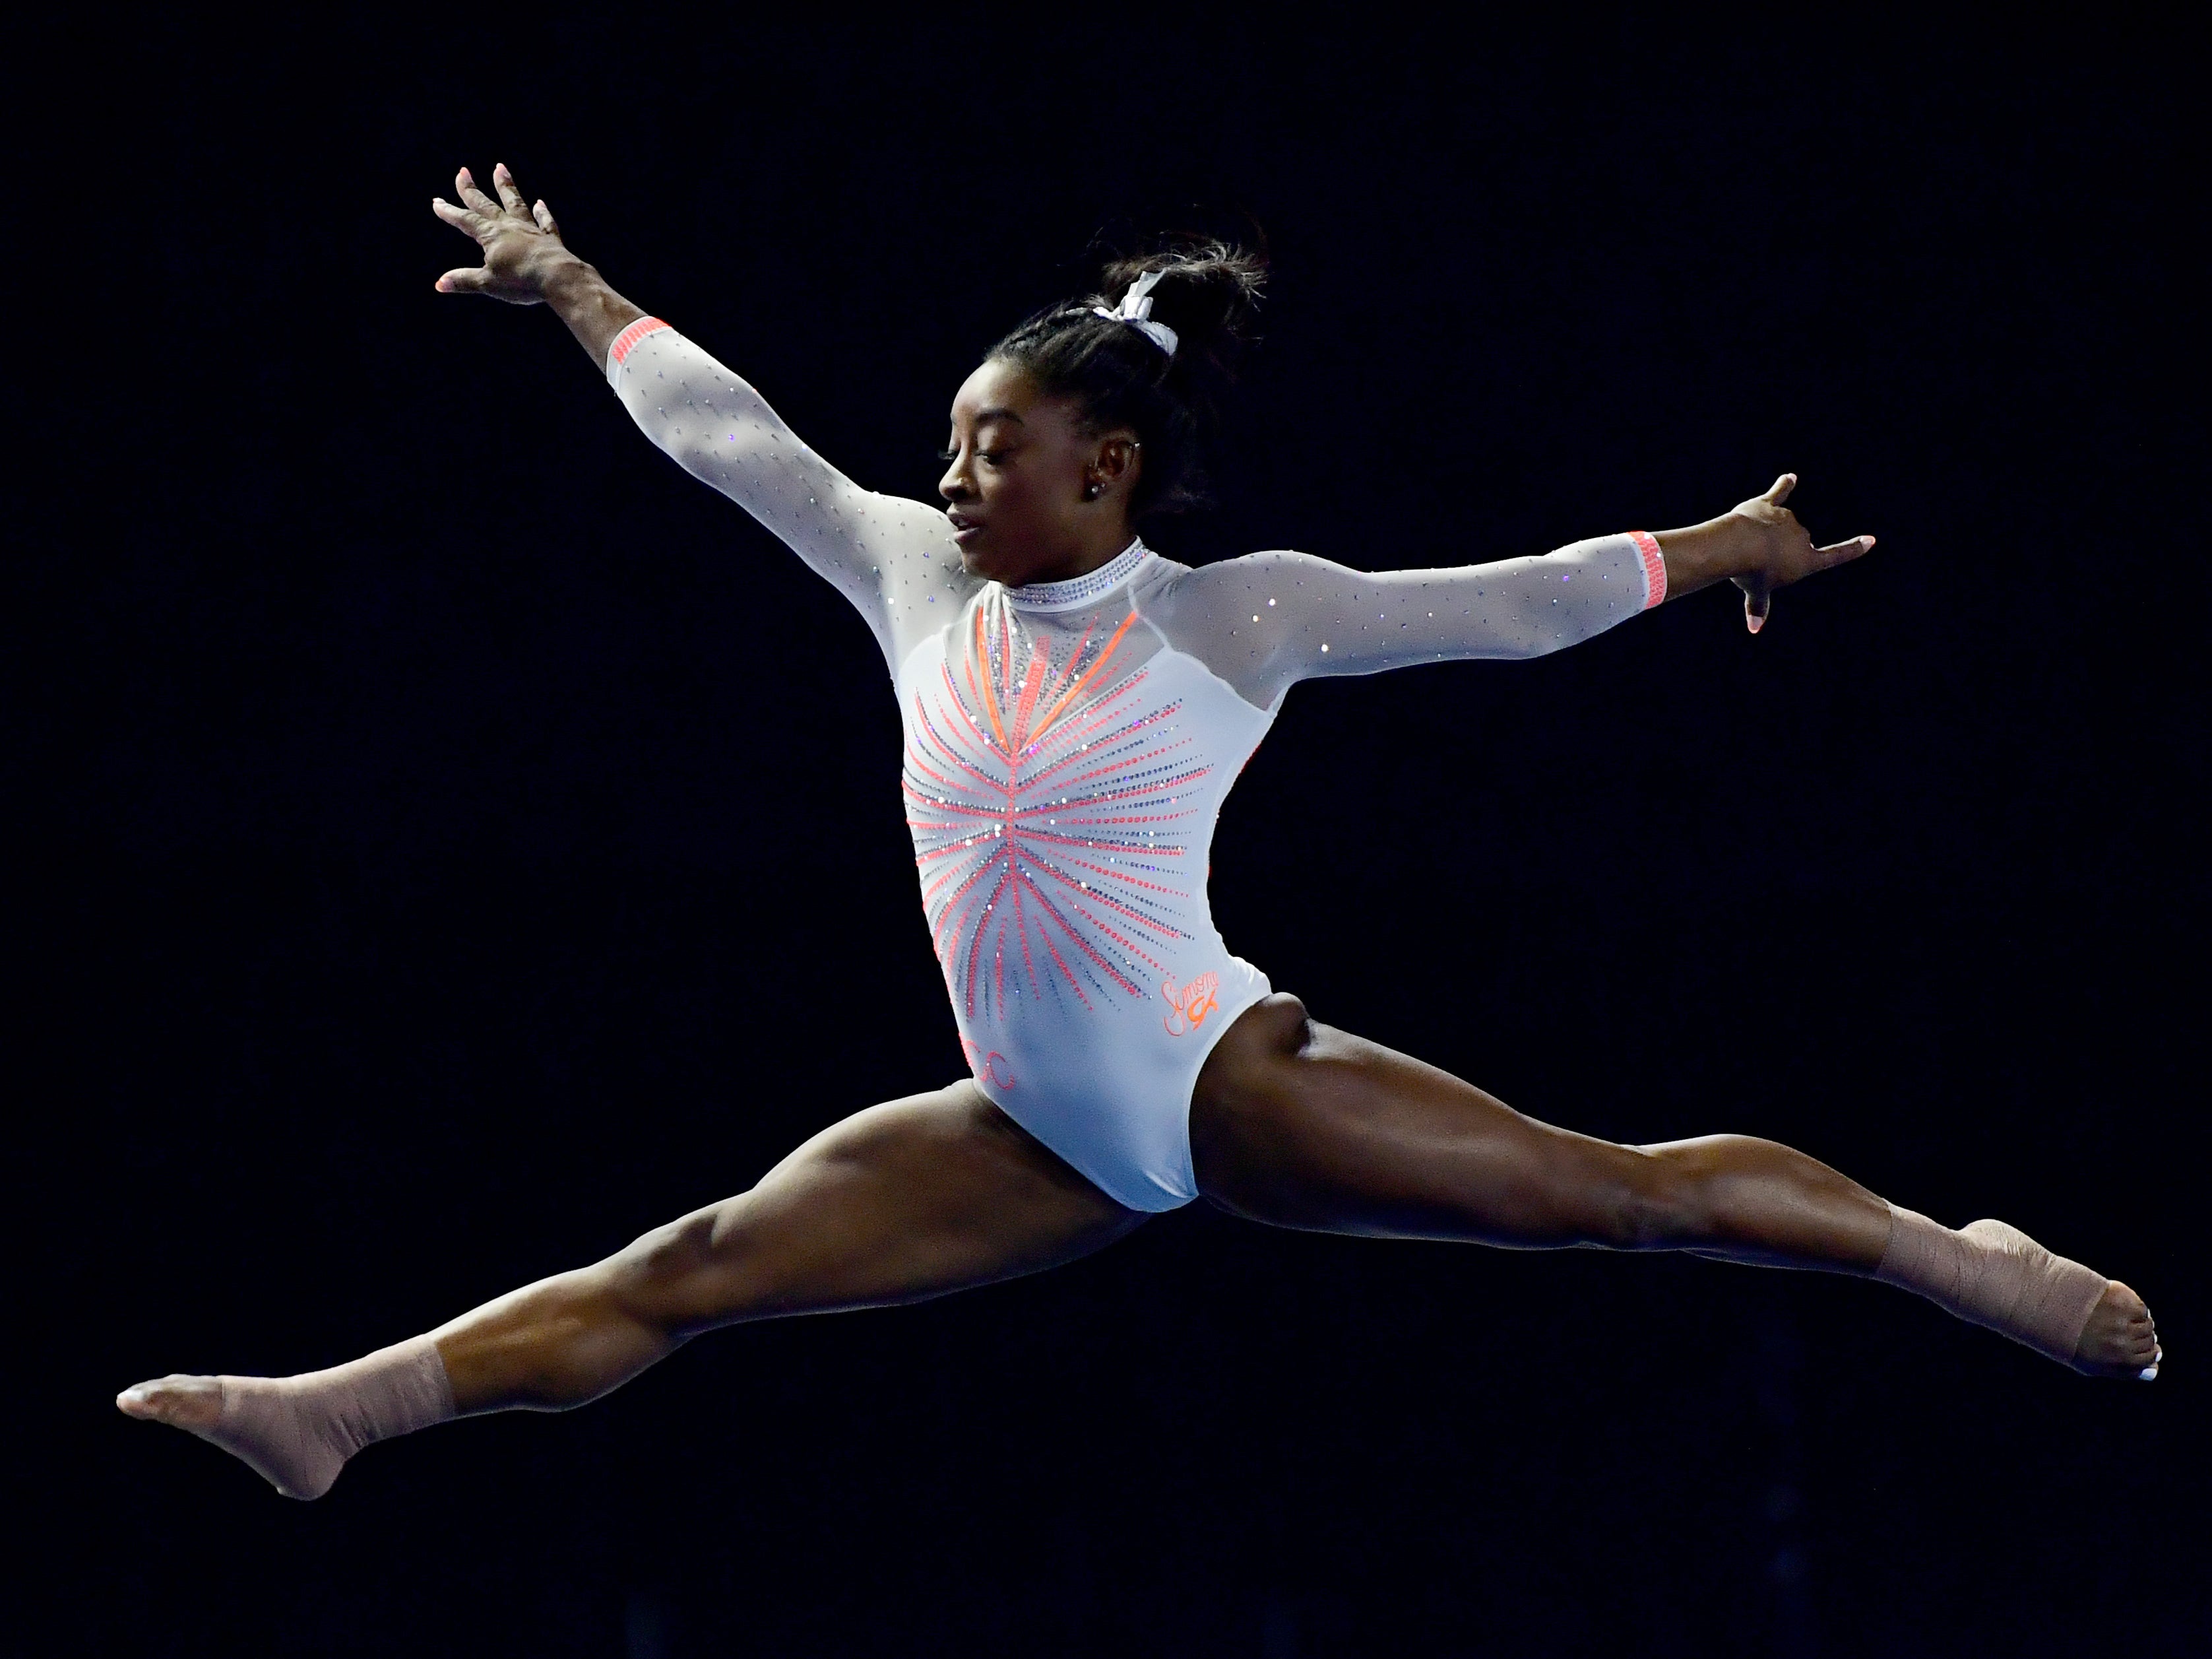 Simone Biles performs her floor routine during a US gymnastics competition